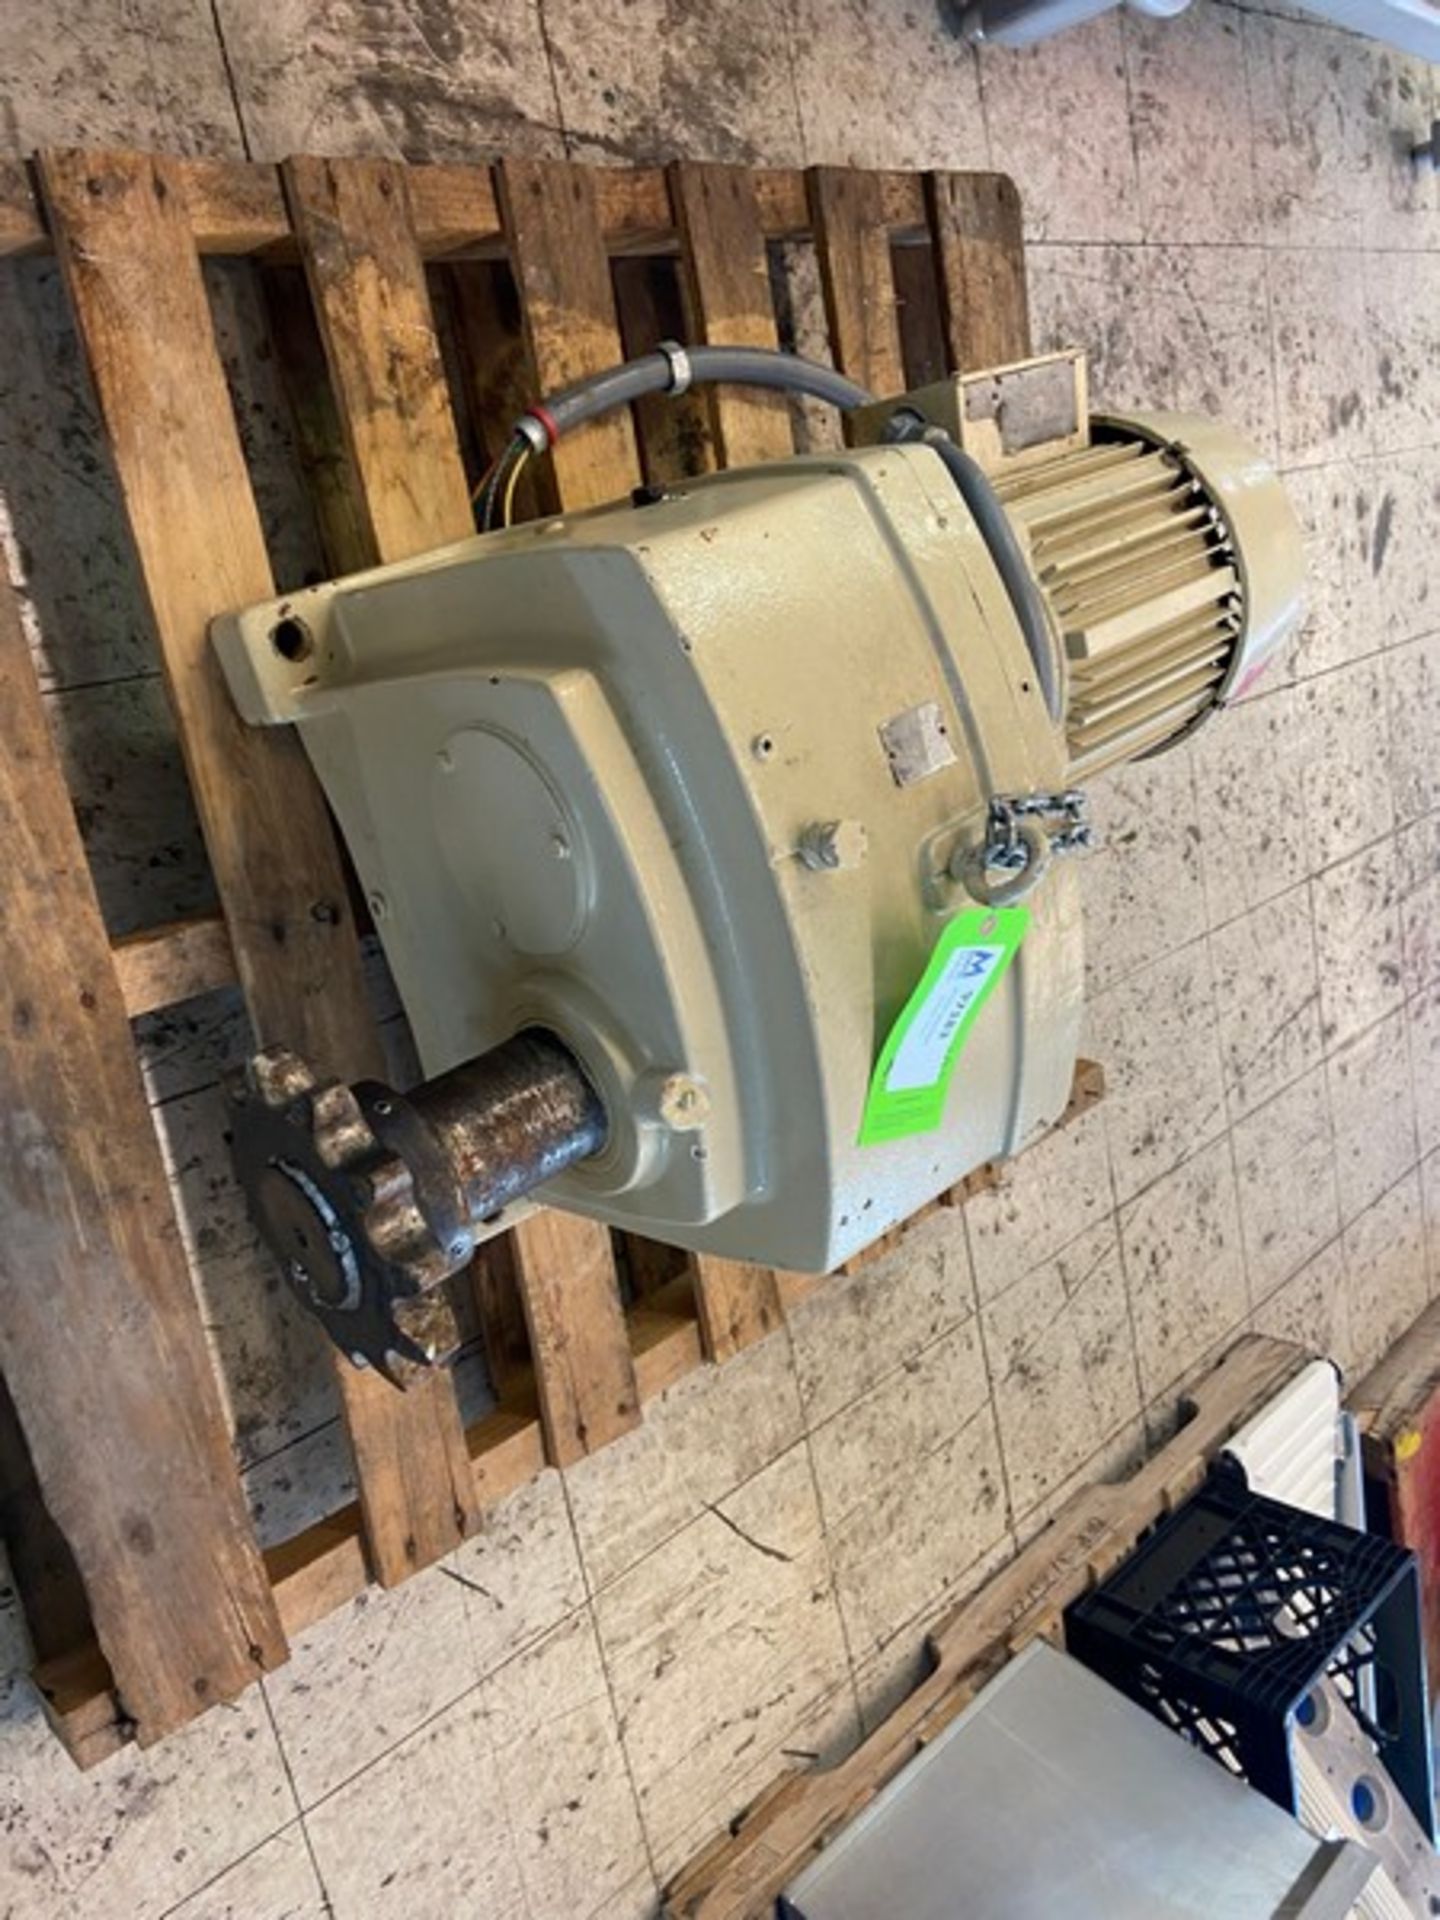 U.S. Electric 10 hp Drive,230/460 Volts, 3 Phase (INV#97183) (Located @ the MDG Auction Showroom 2.0 - Image 10 of 12